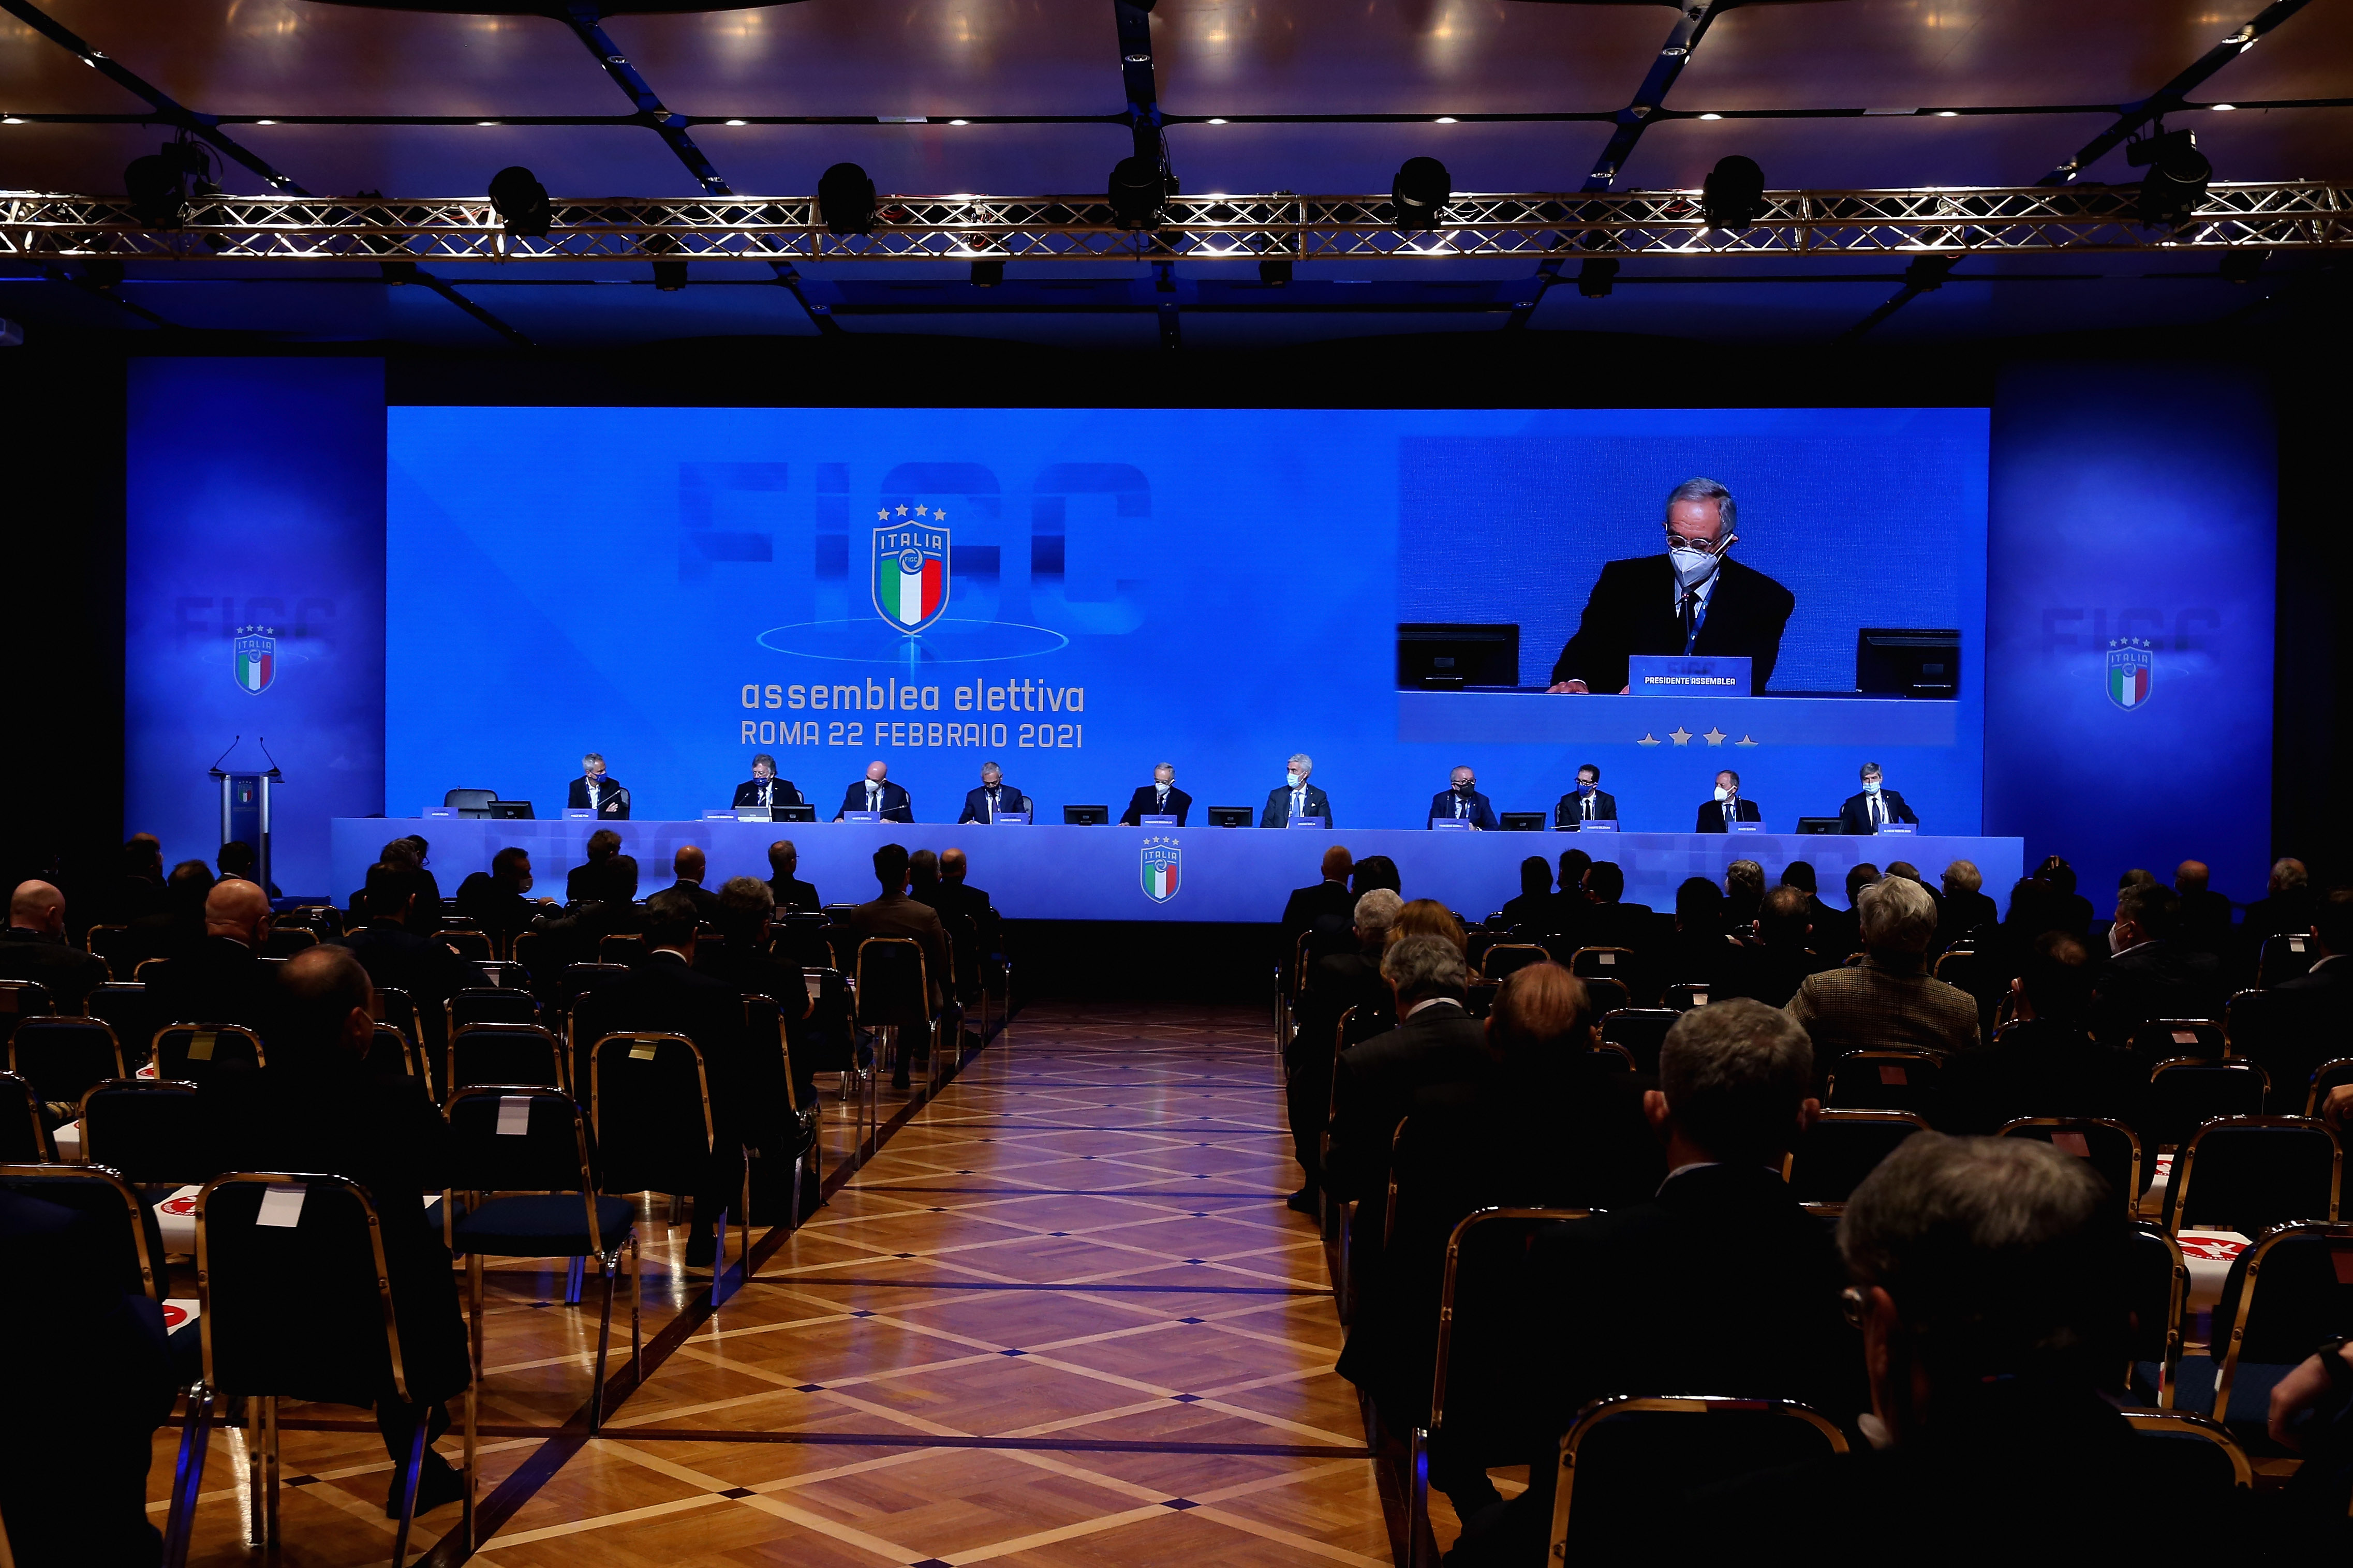 Gabriele Gravina re-elected as president with over 73% of the